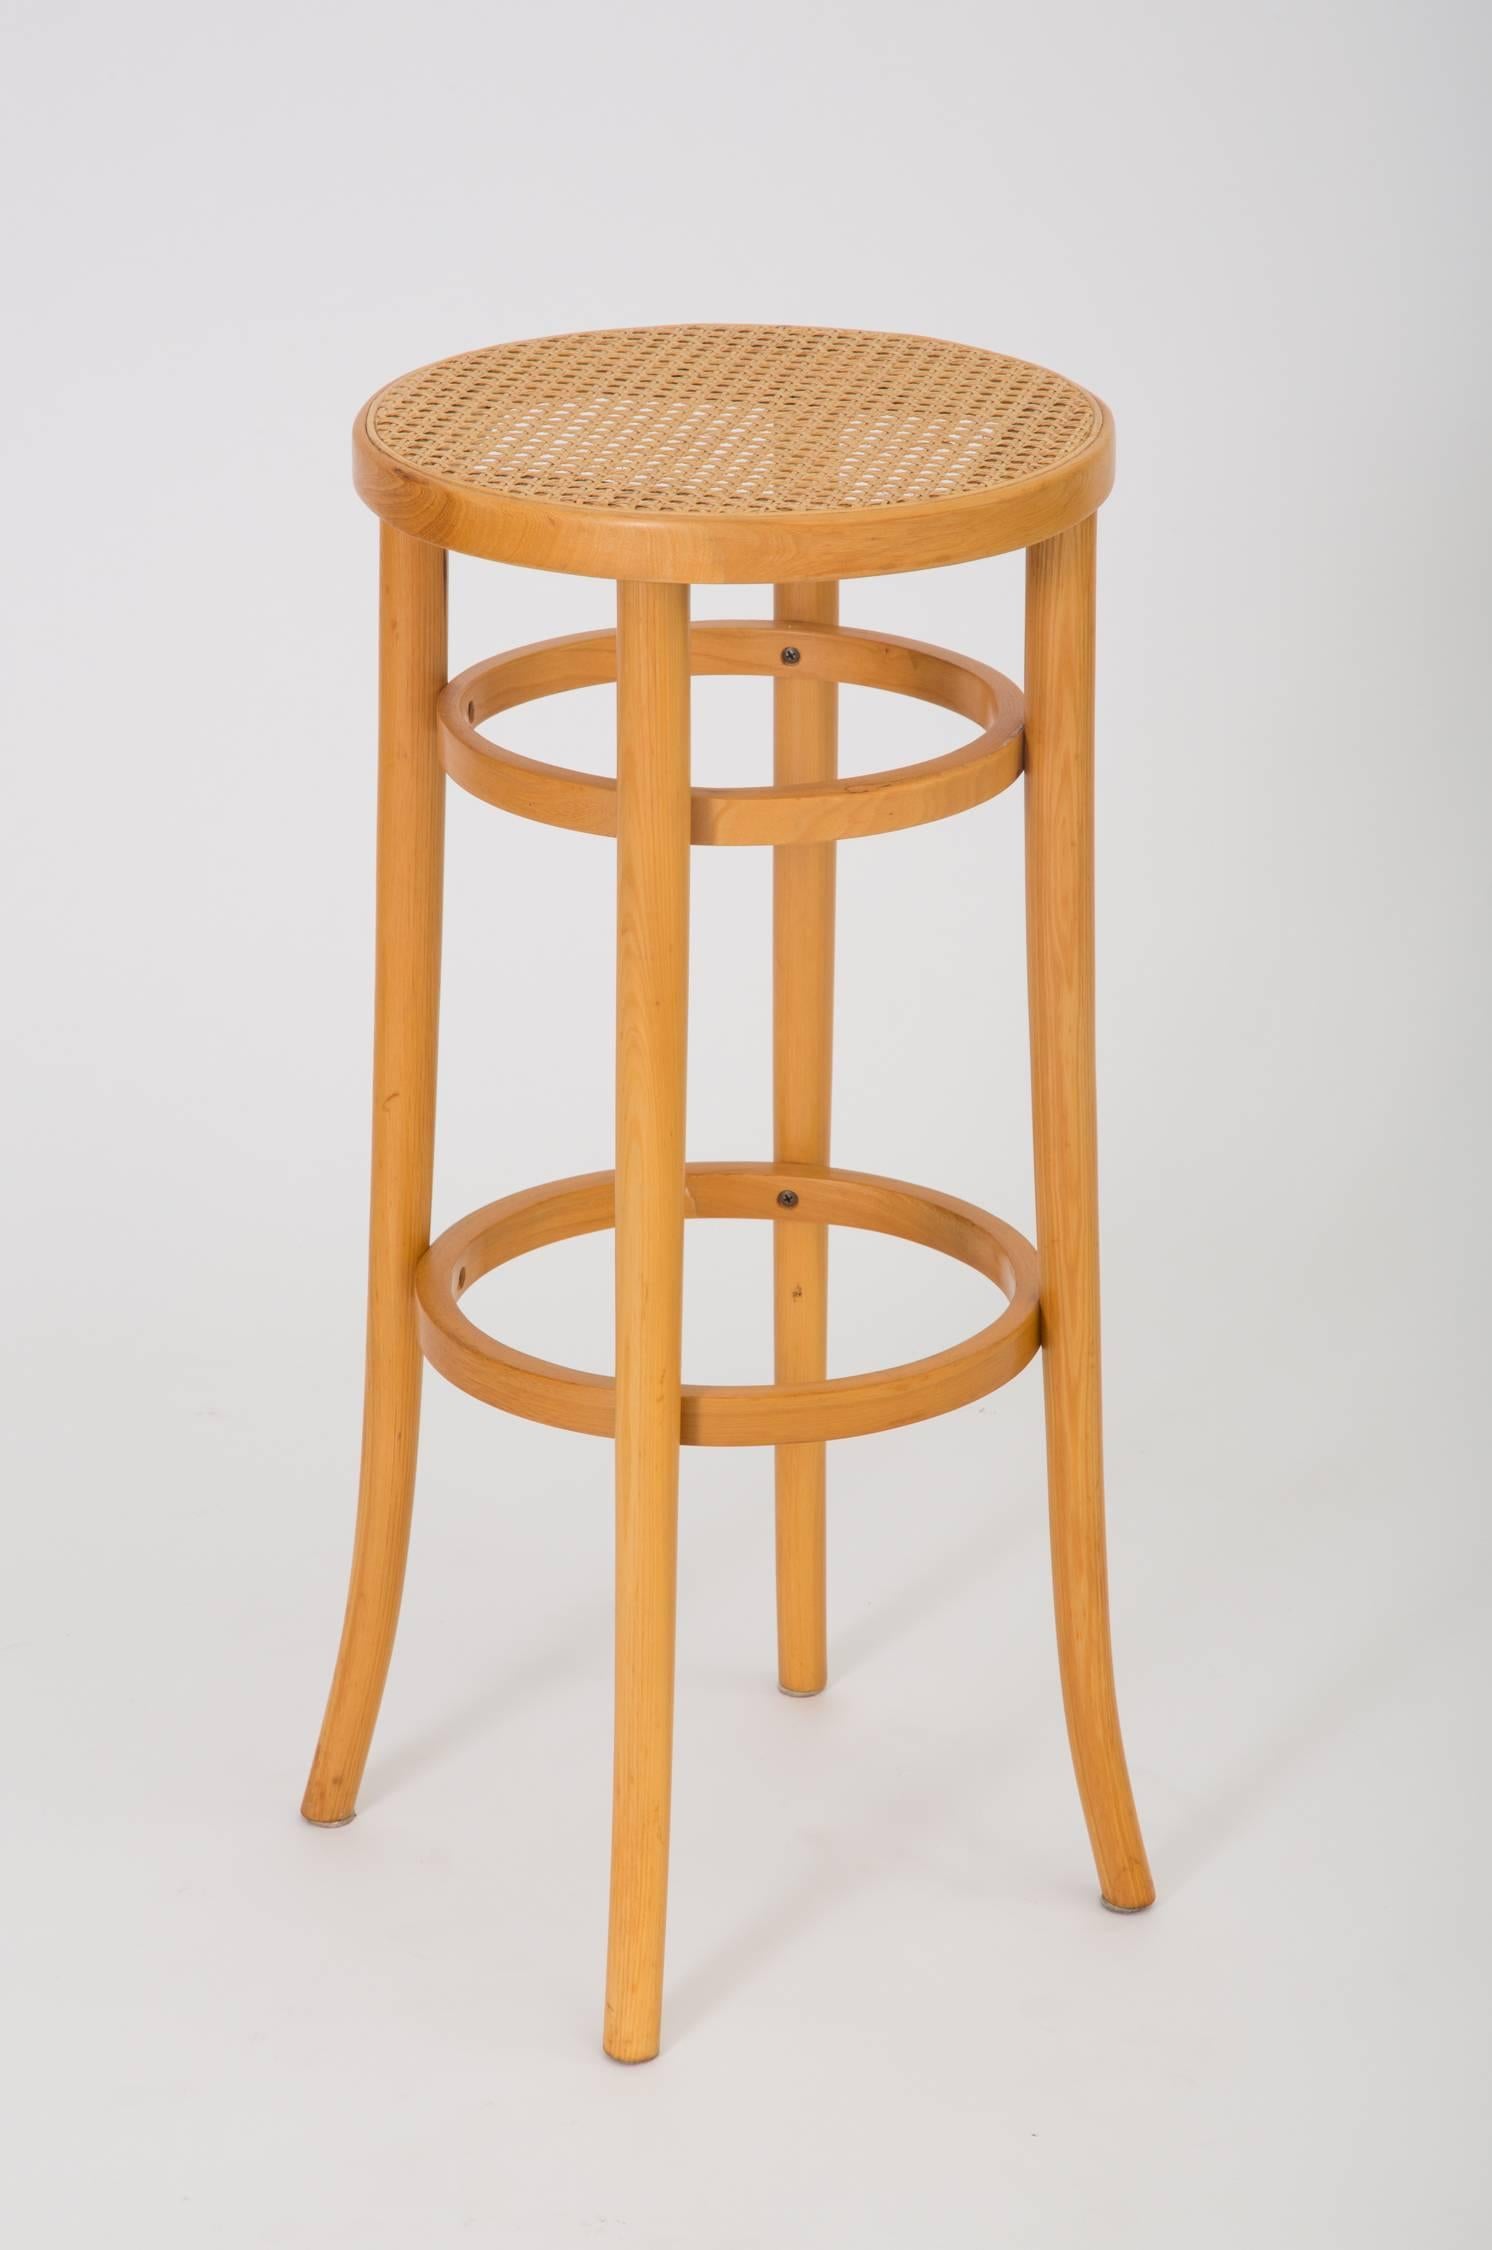 A pair of 1980s American-made Thonet Industries round bar-height stools, manufactured in Thonet’s signature bent birchwood with woven cane seats. Each stool has four rounded saber legs and two support rings below the seat and at foot level. Both